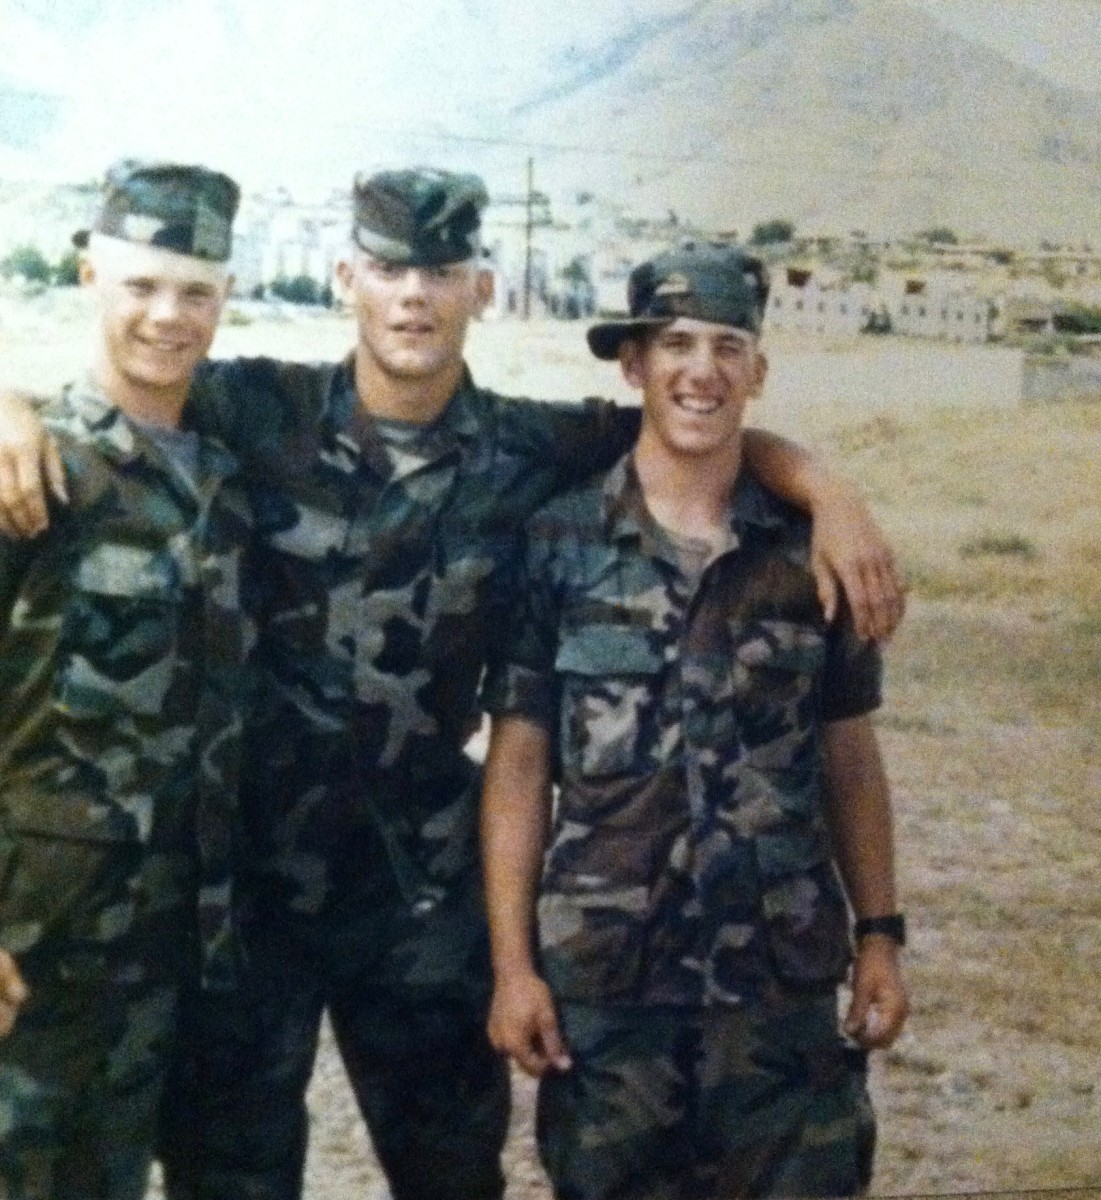 This time it's Shane on the left, me in the middle, and Clint on the right (my left).